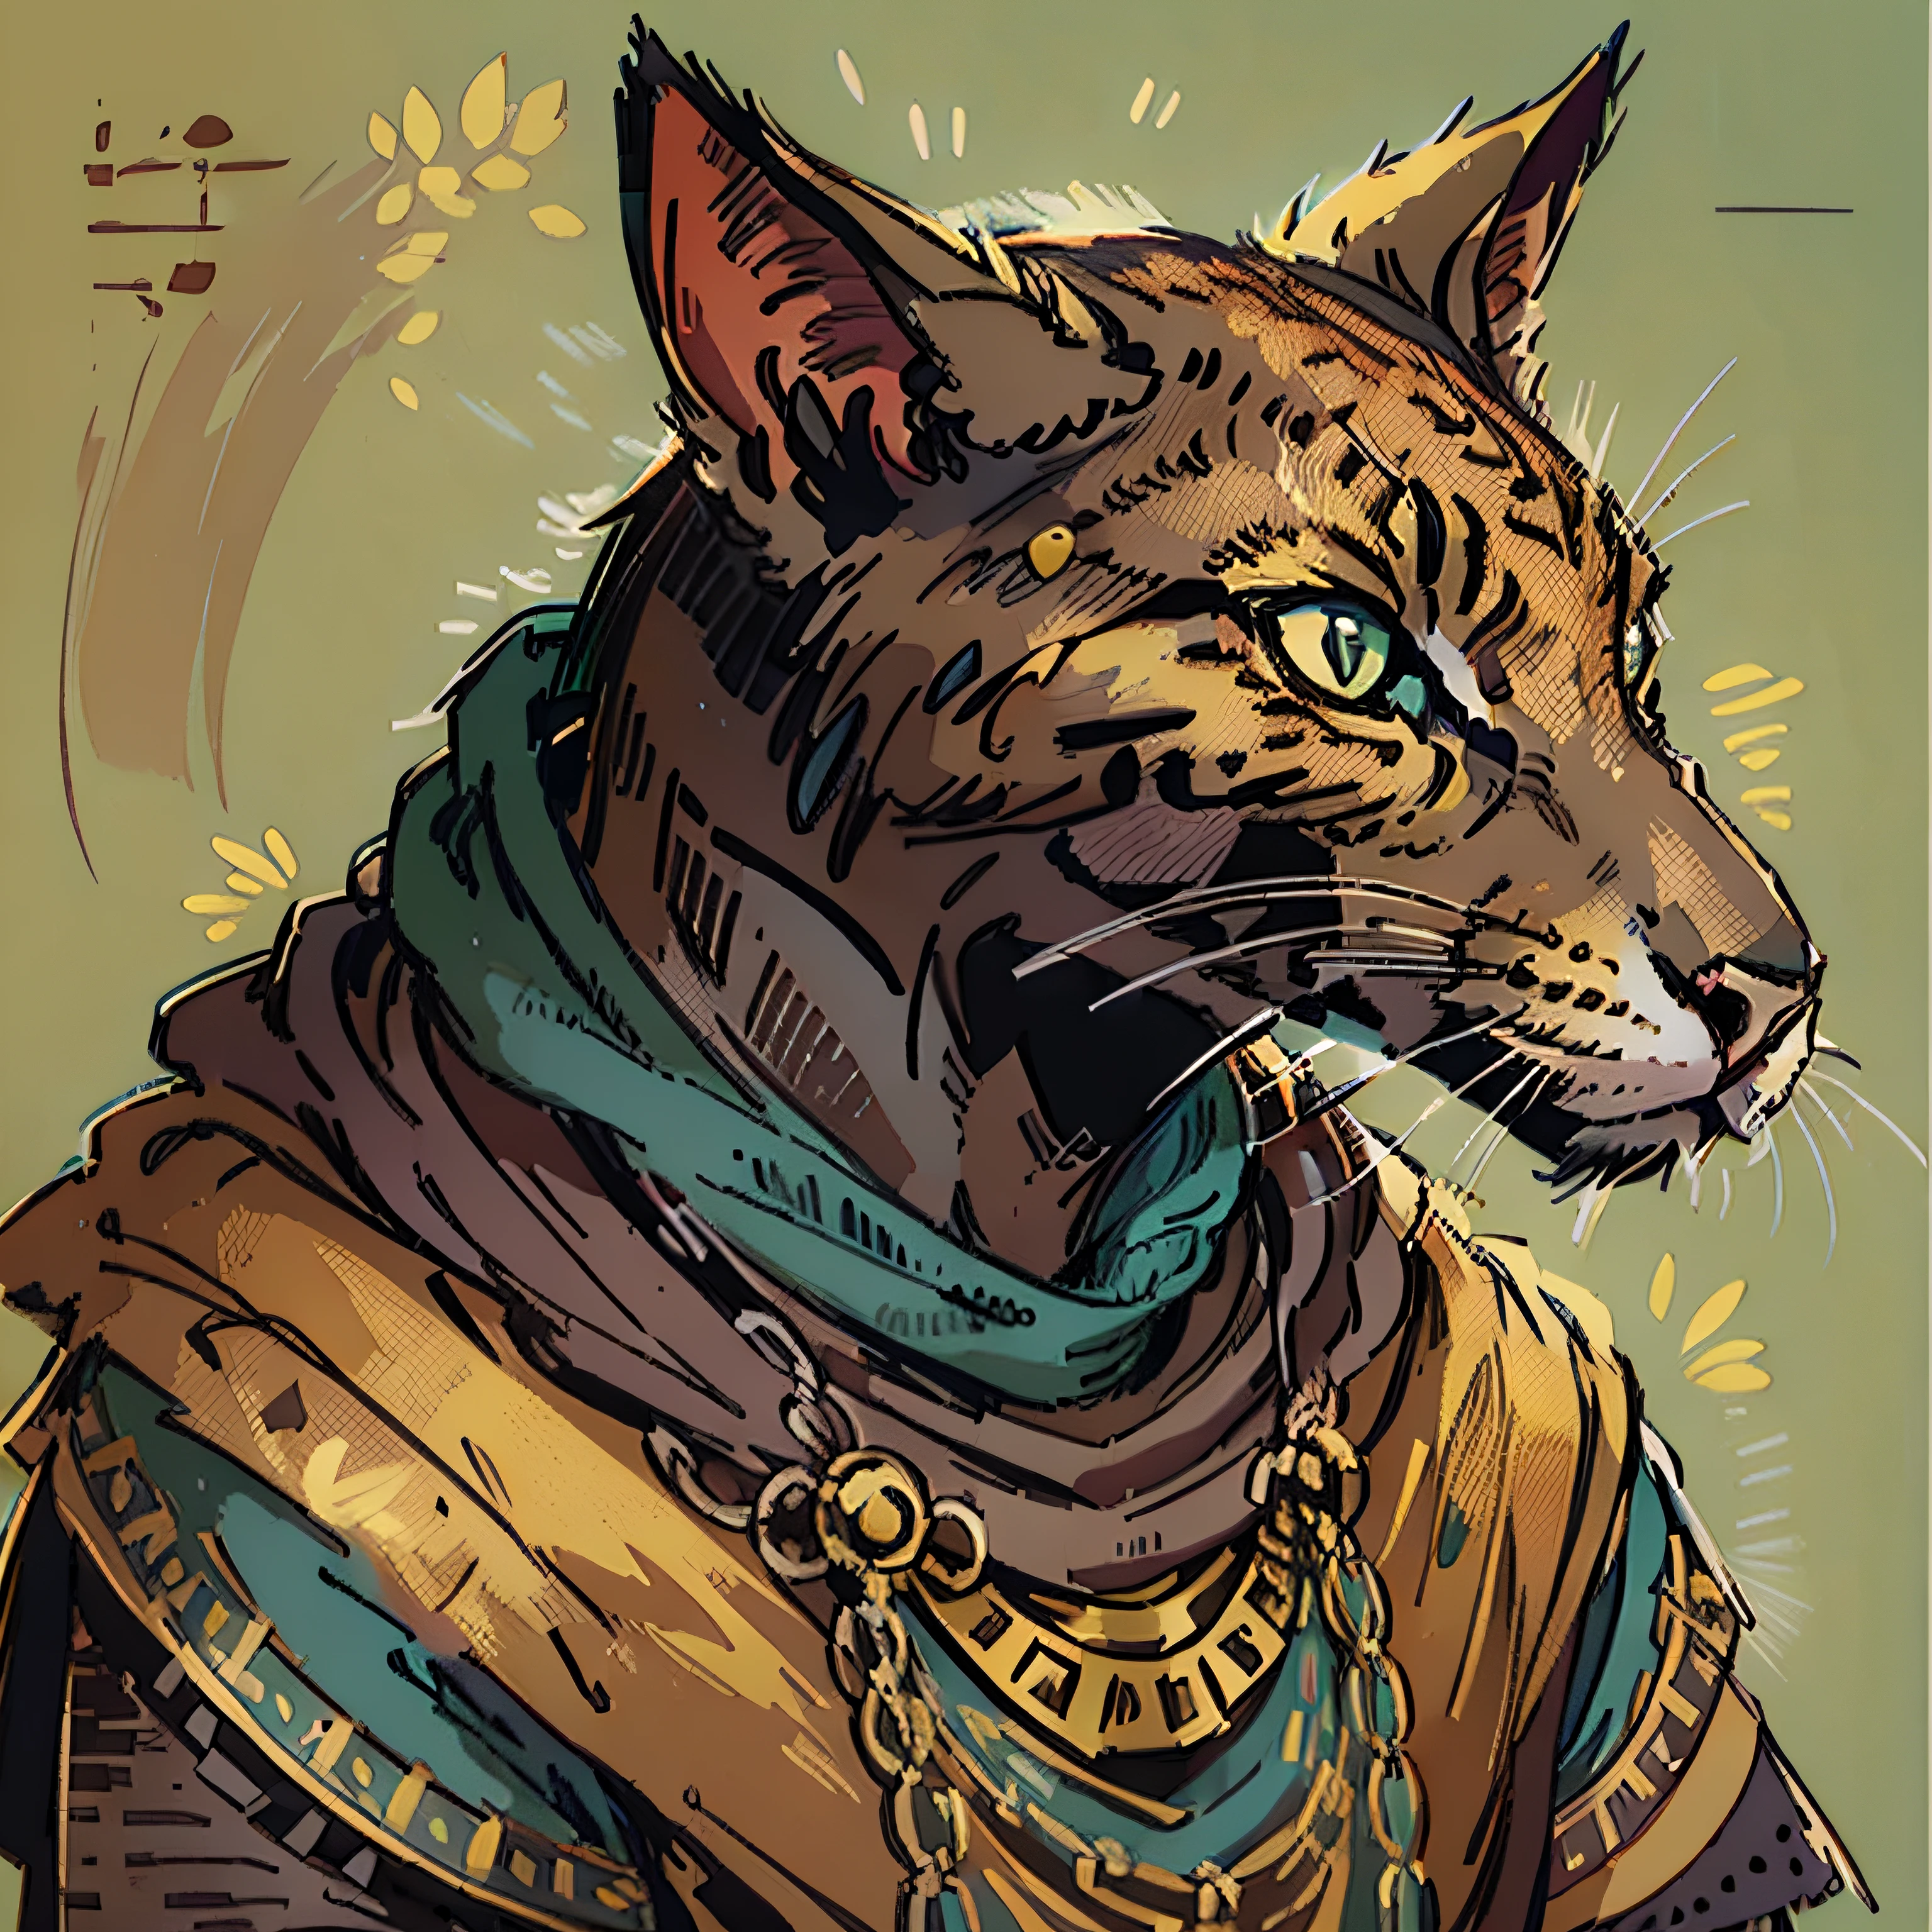 tabaxi rpg race, anubis Egyptian inspiration, cat face humanoid, villager, commom clothes, , character, medieval fantasy, close up portrait